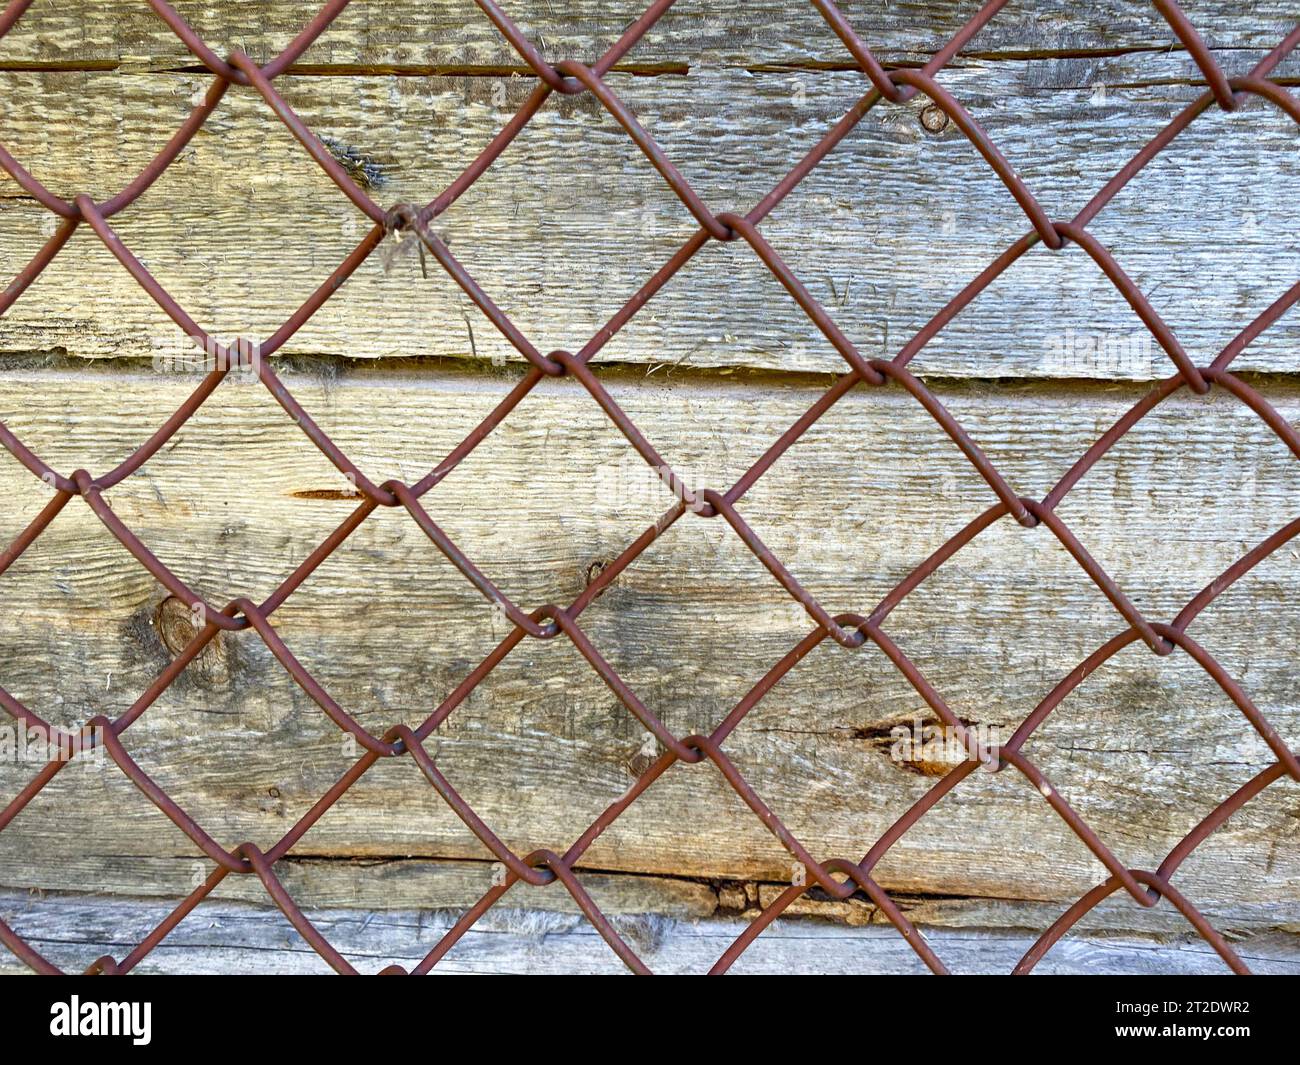 Brown wood texture of natural wood from vertical planks with knots. Background and iron mesh netting. Stock Photo